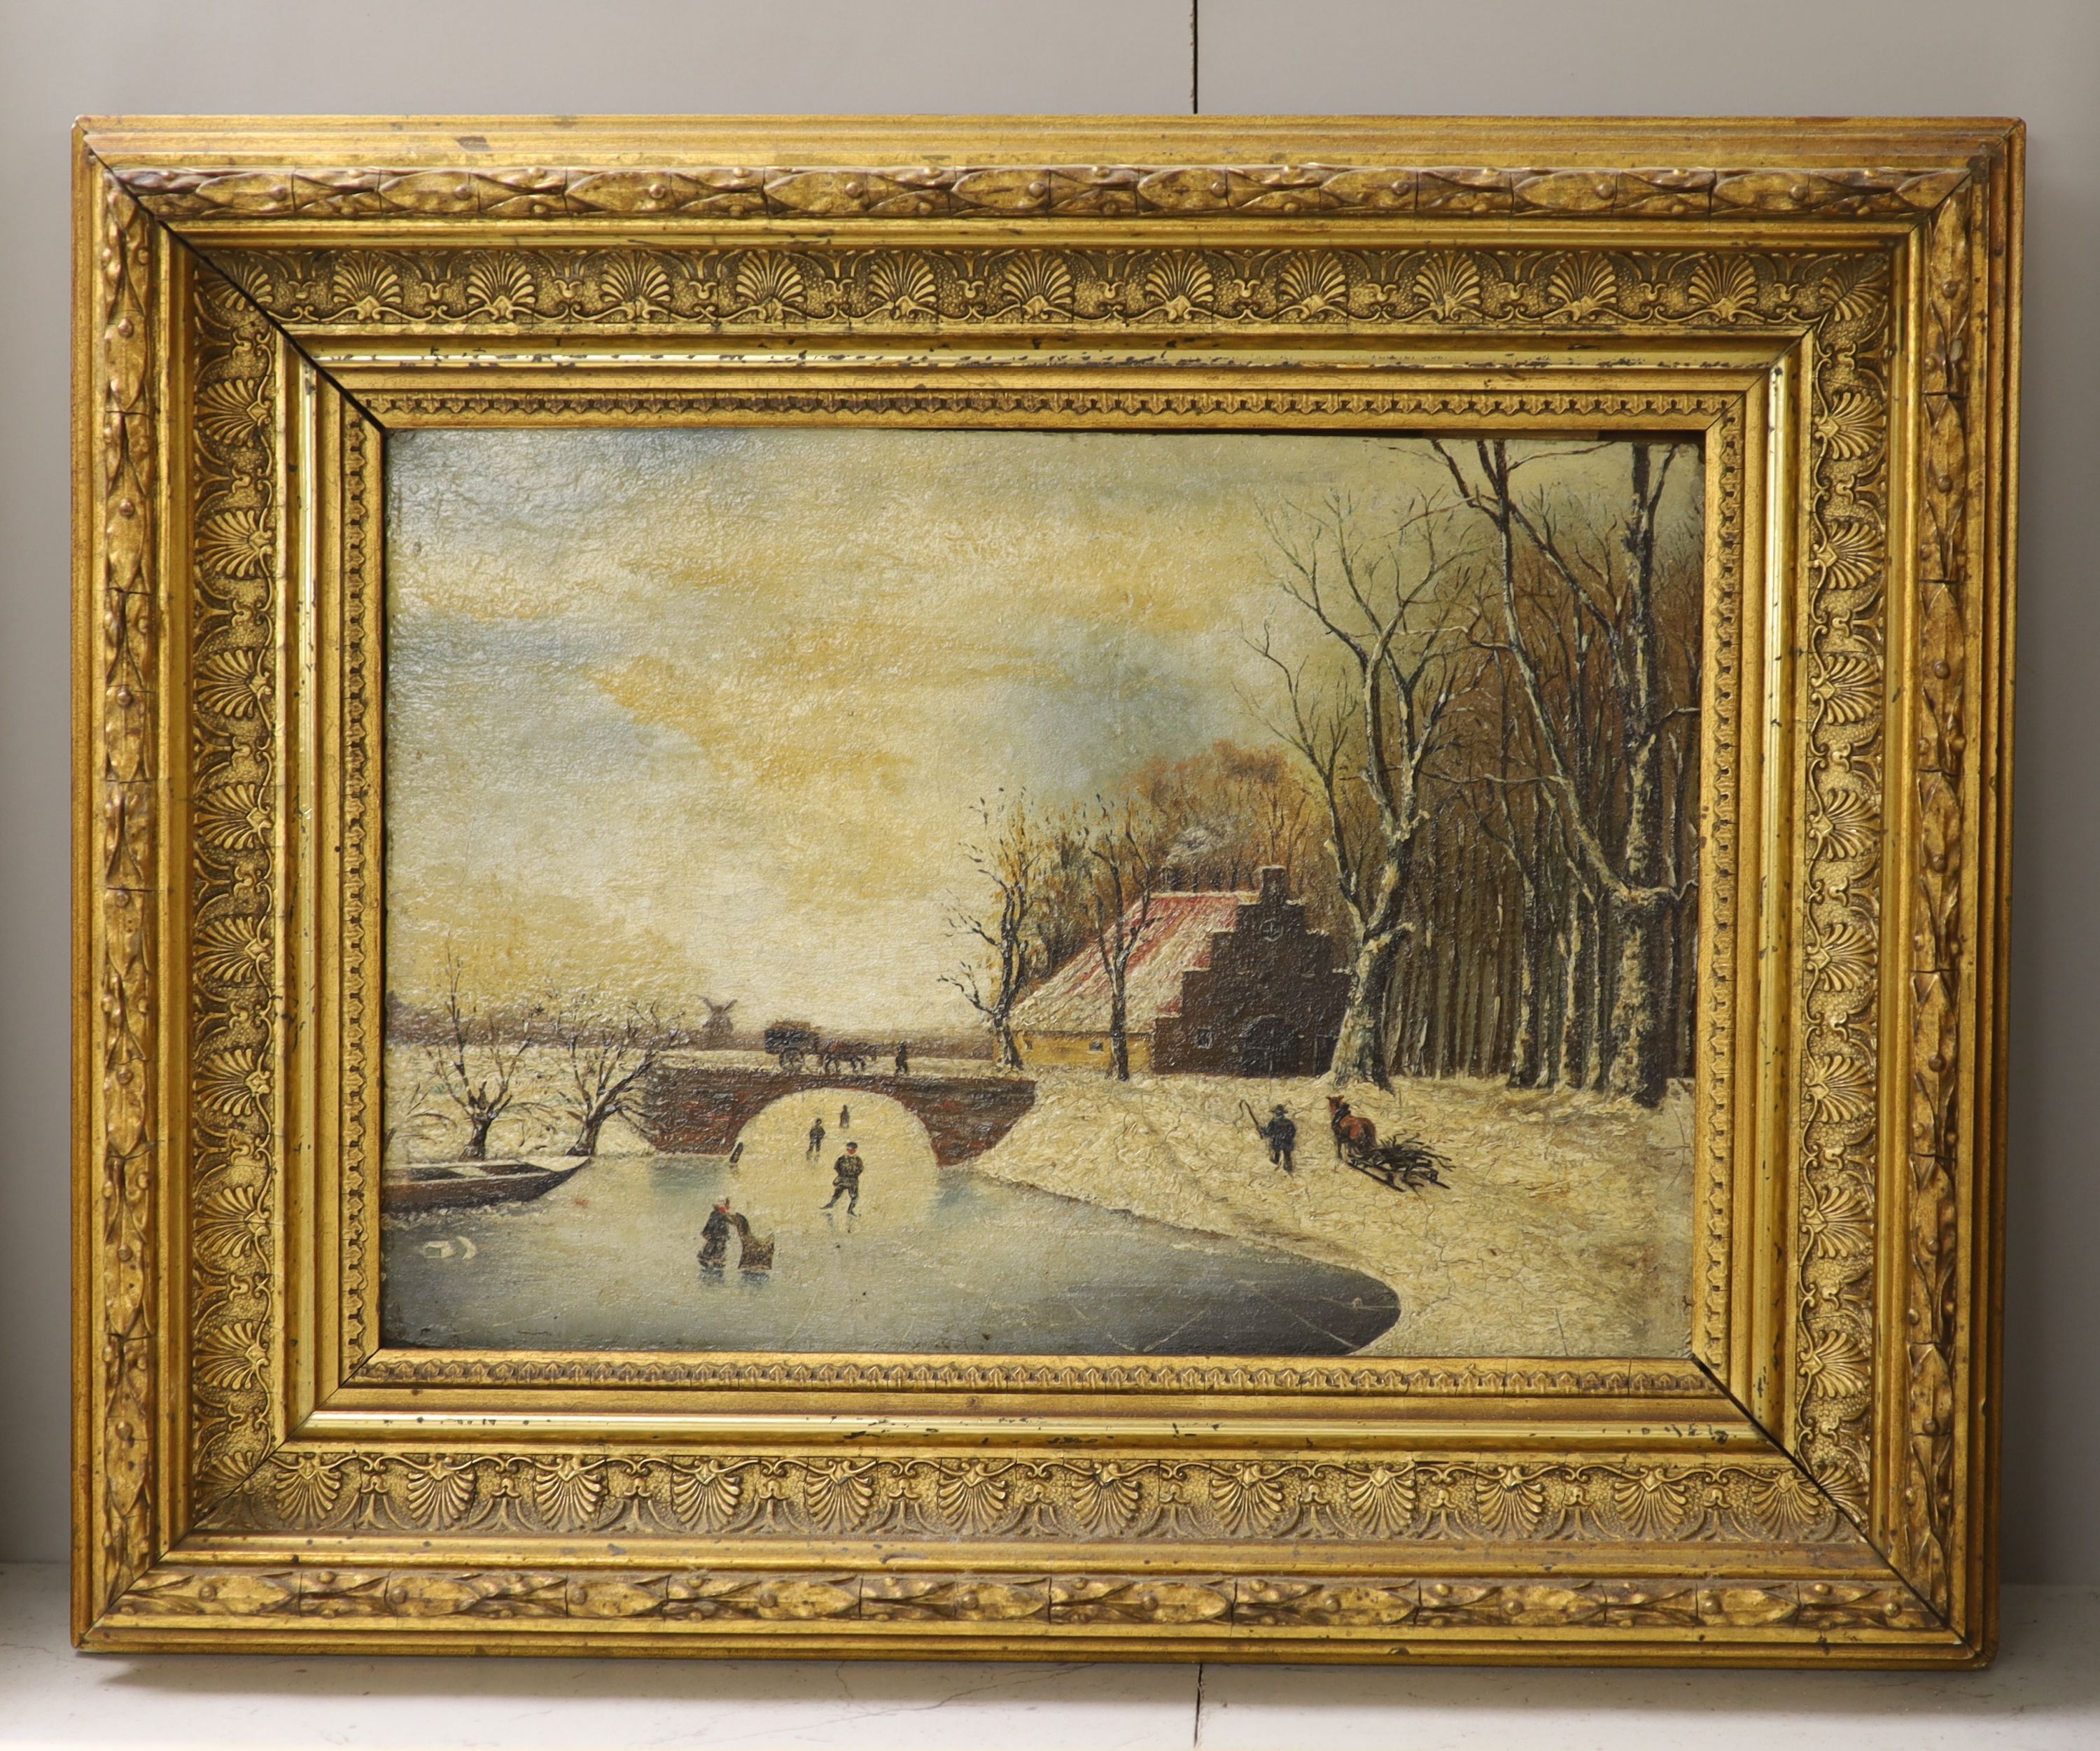 19th century Dutch School, oil on board, Winter landscape with figures on a frozen river, 17 x 25cm - Image 2 of 2